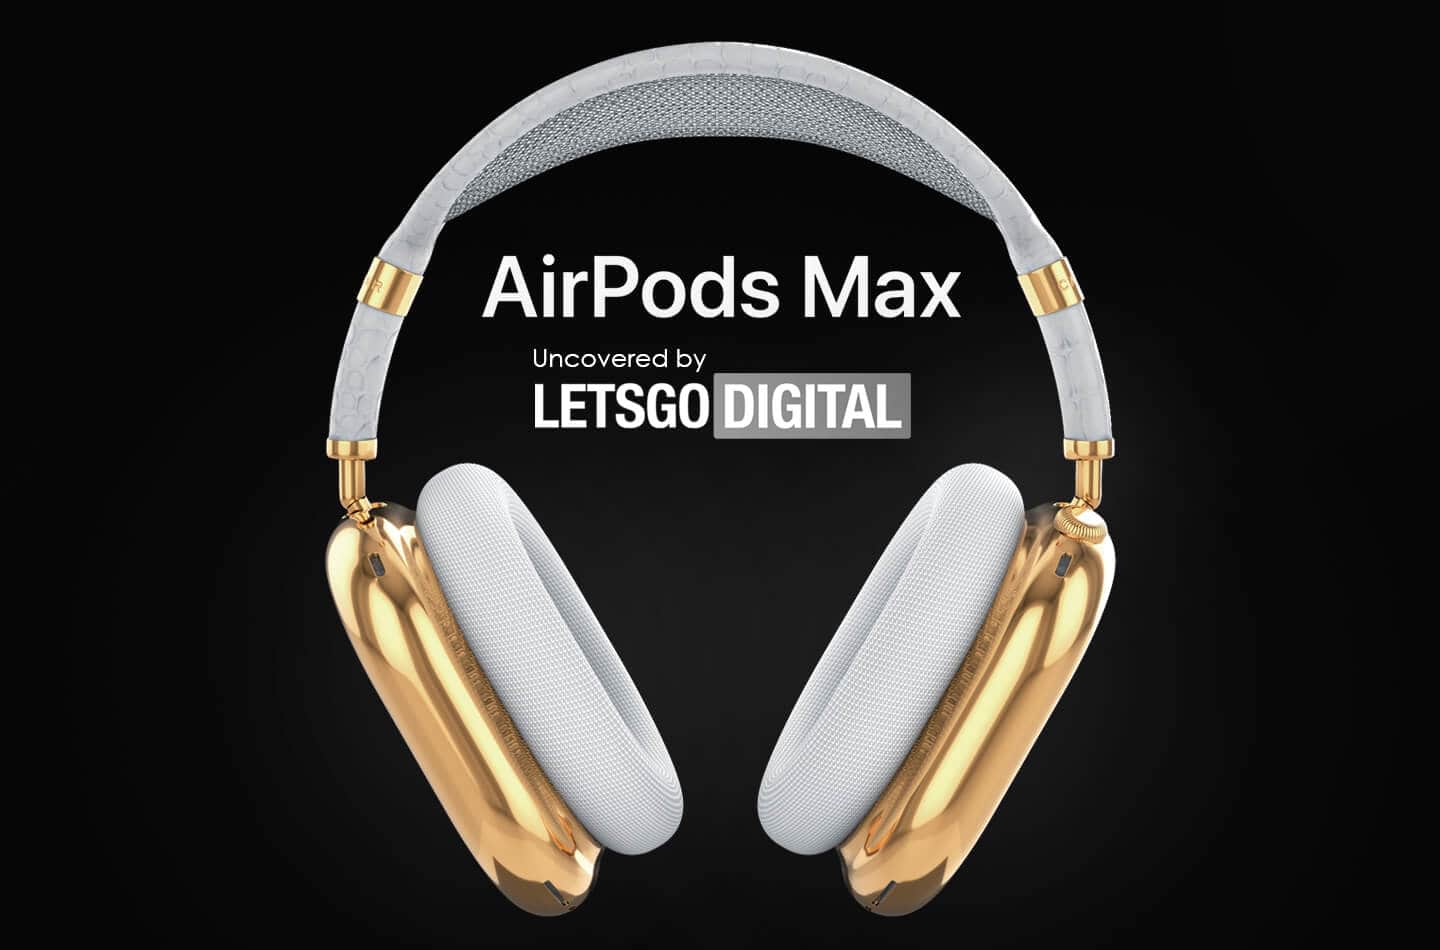 This set of AirPod Max headphones costs $108,000